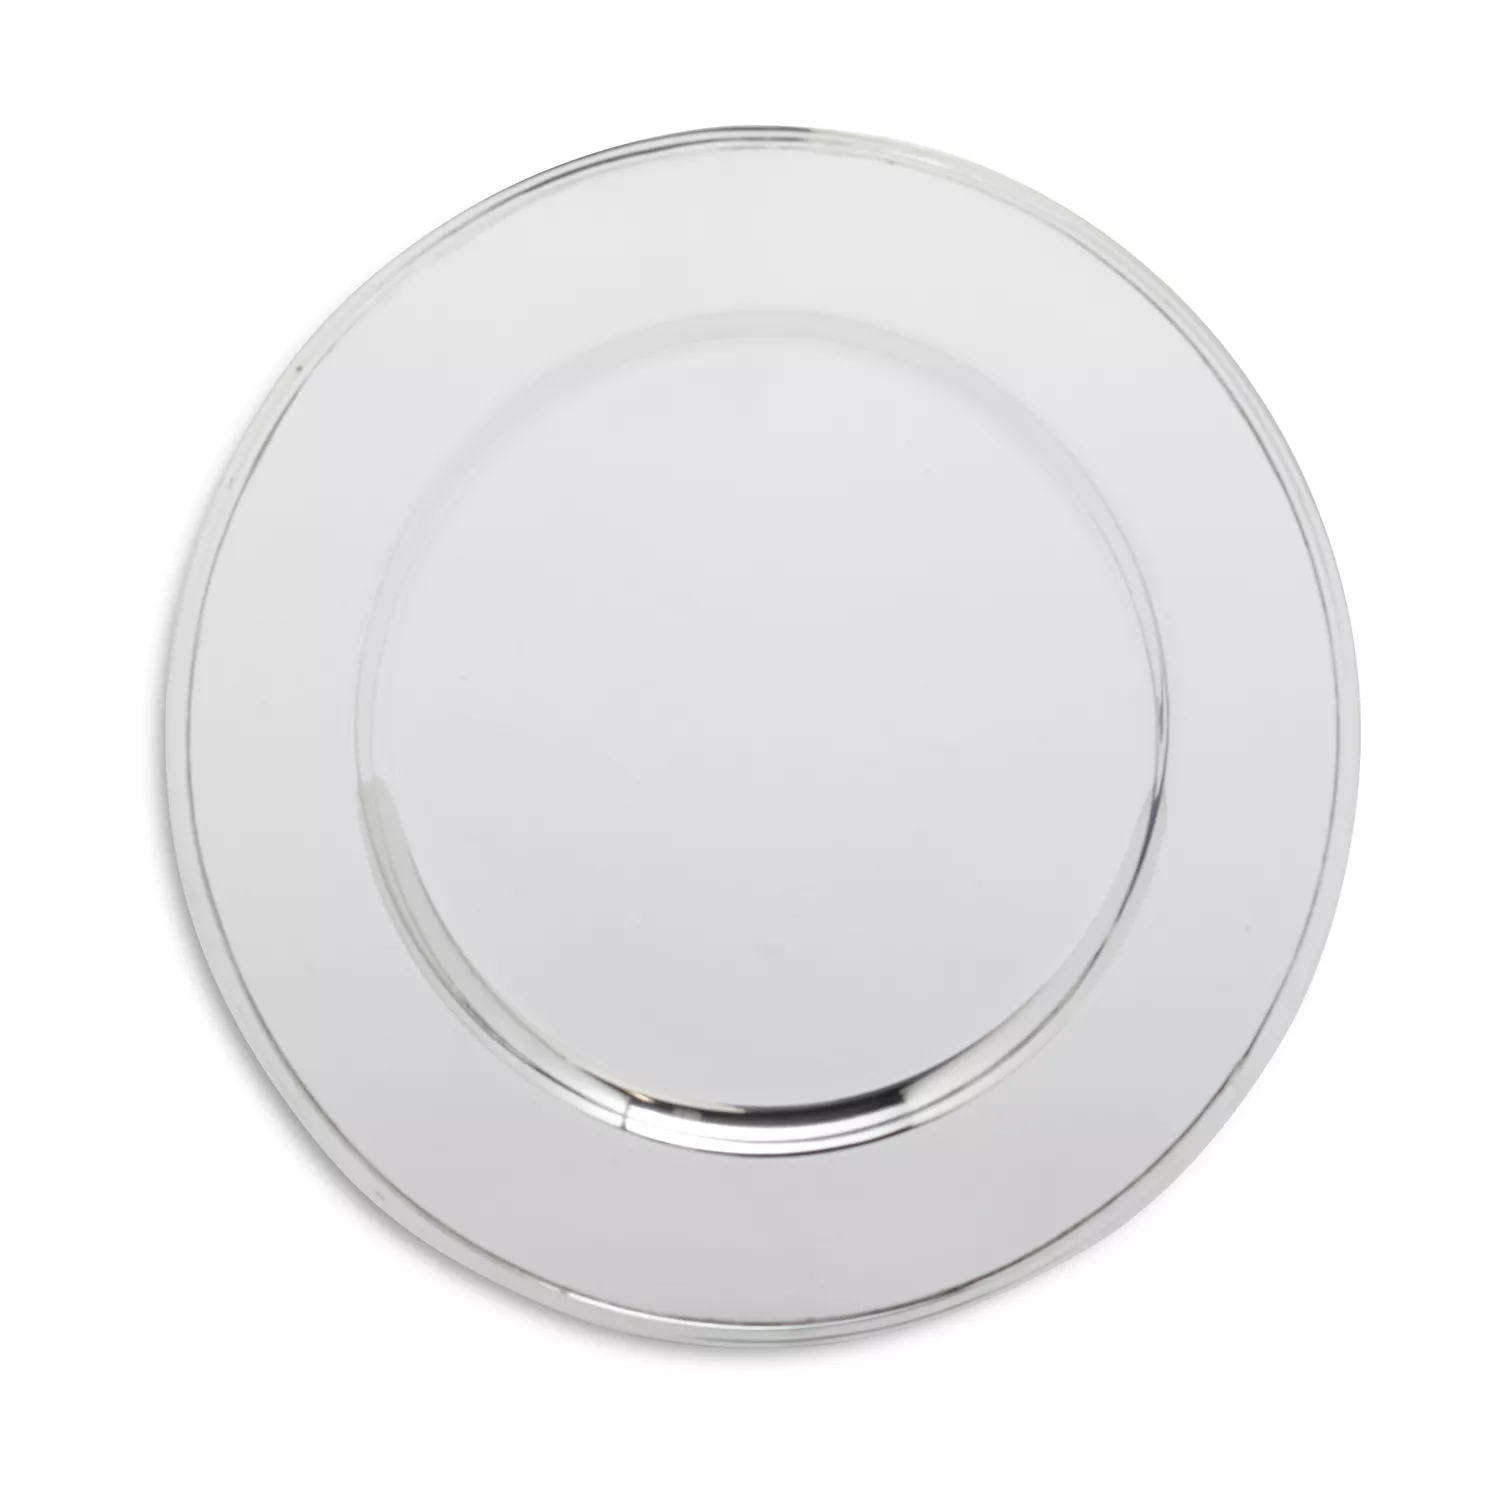 The Cambridge Collection Round Charger